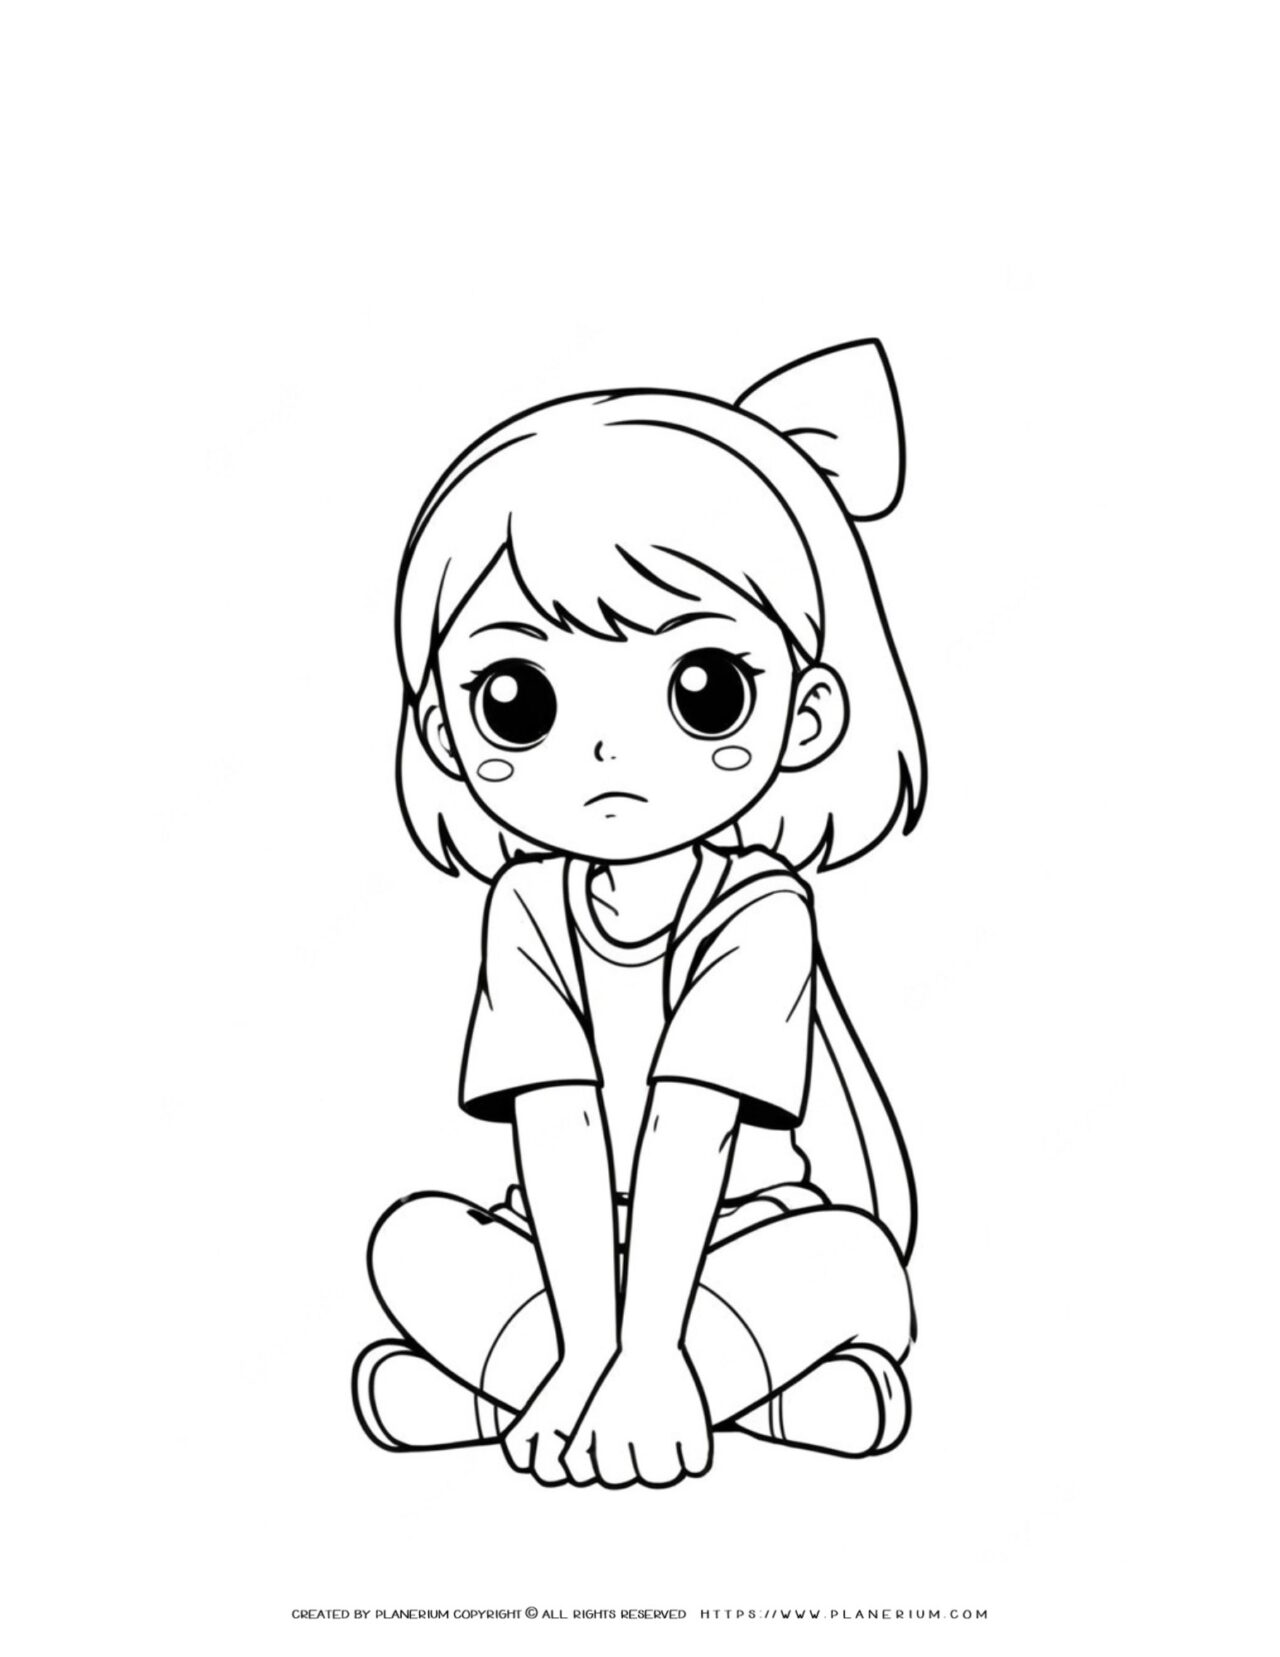 angry-girl-sitting-anime-style-coloring-page